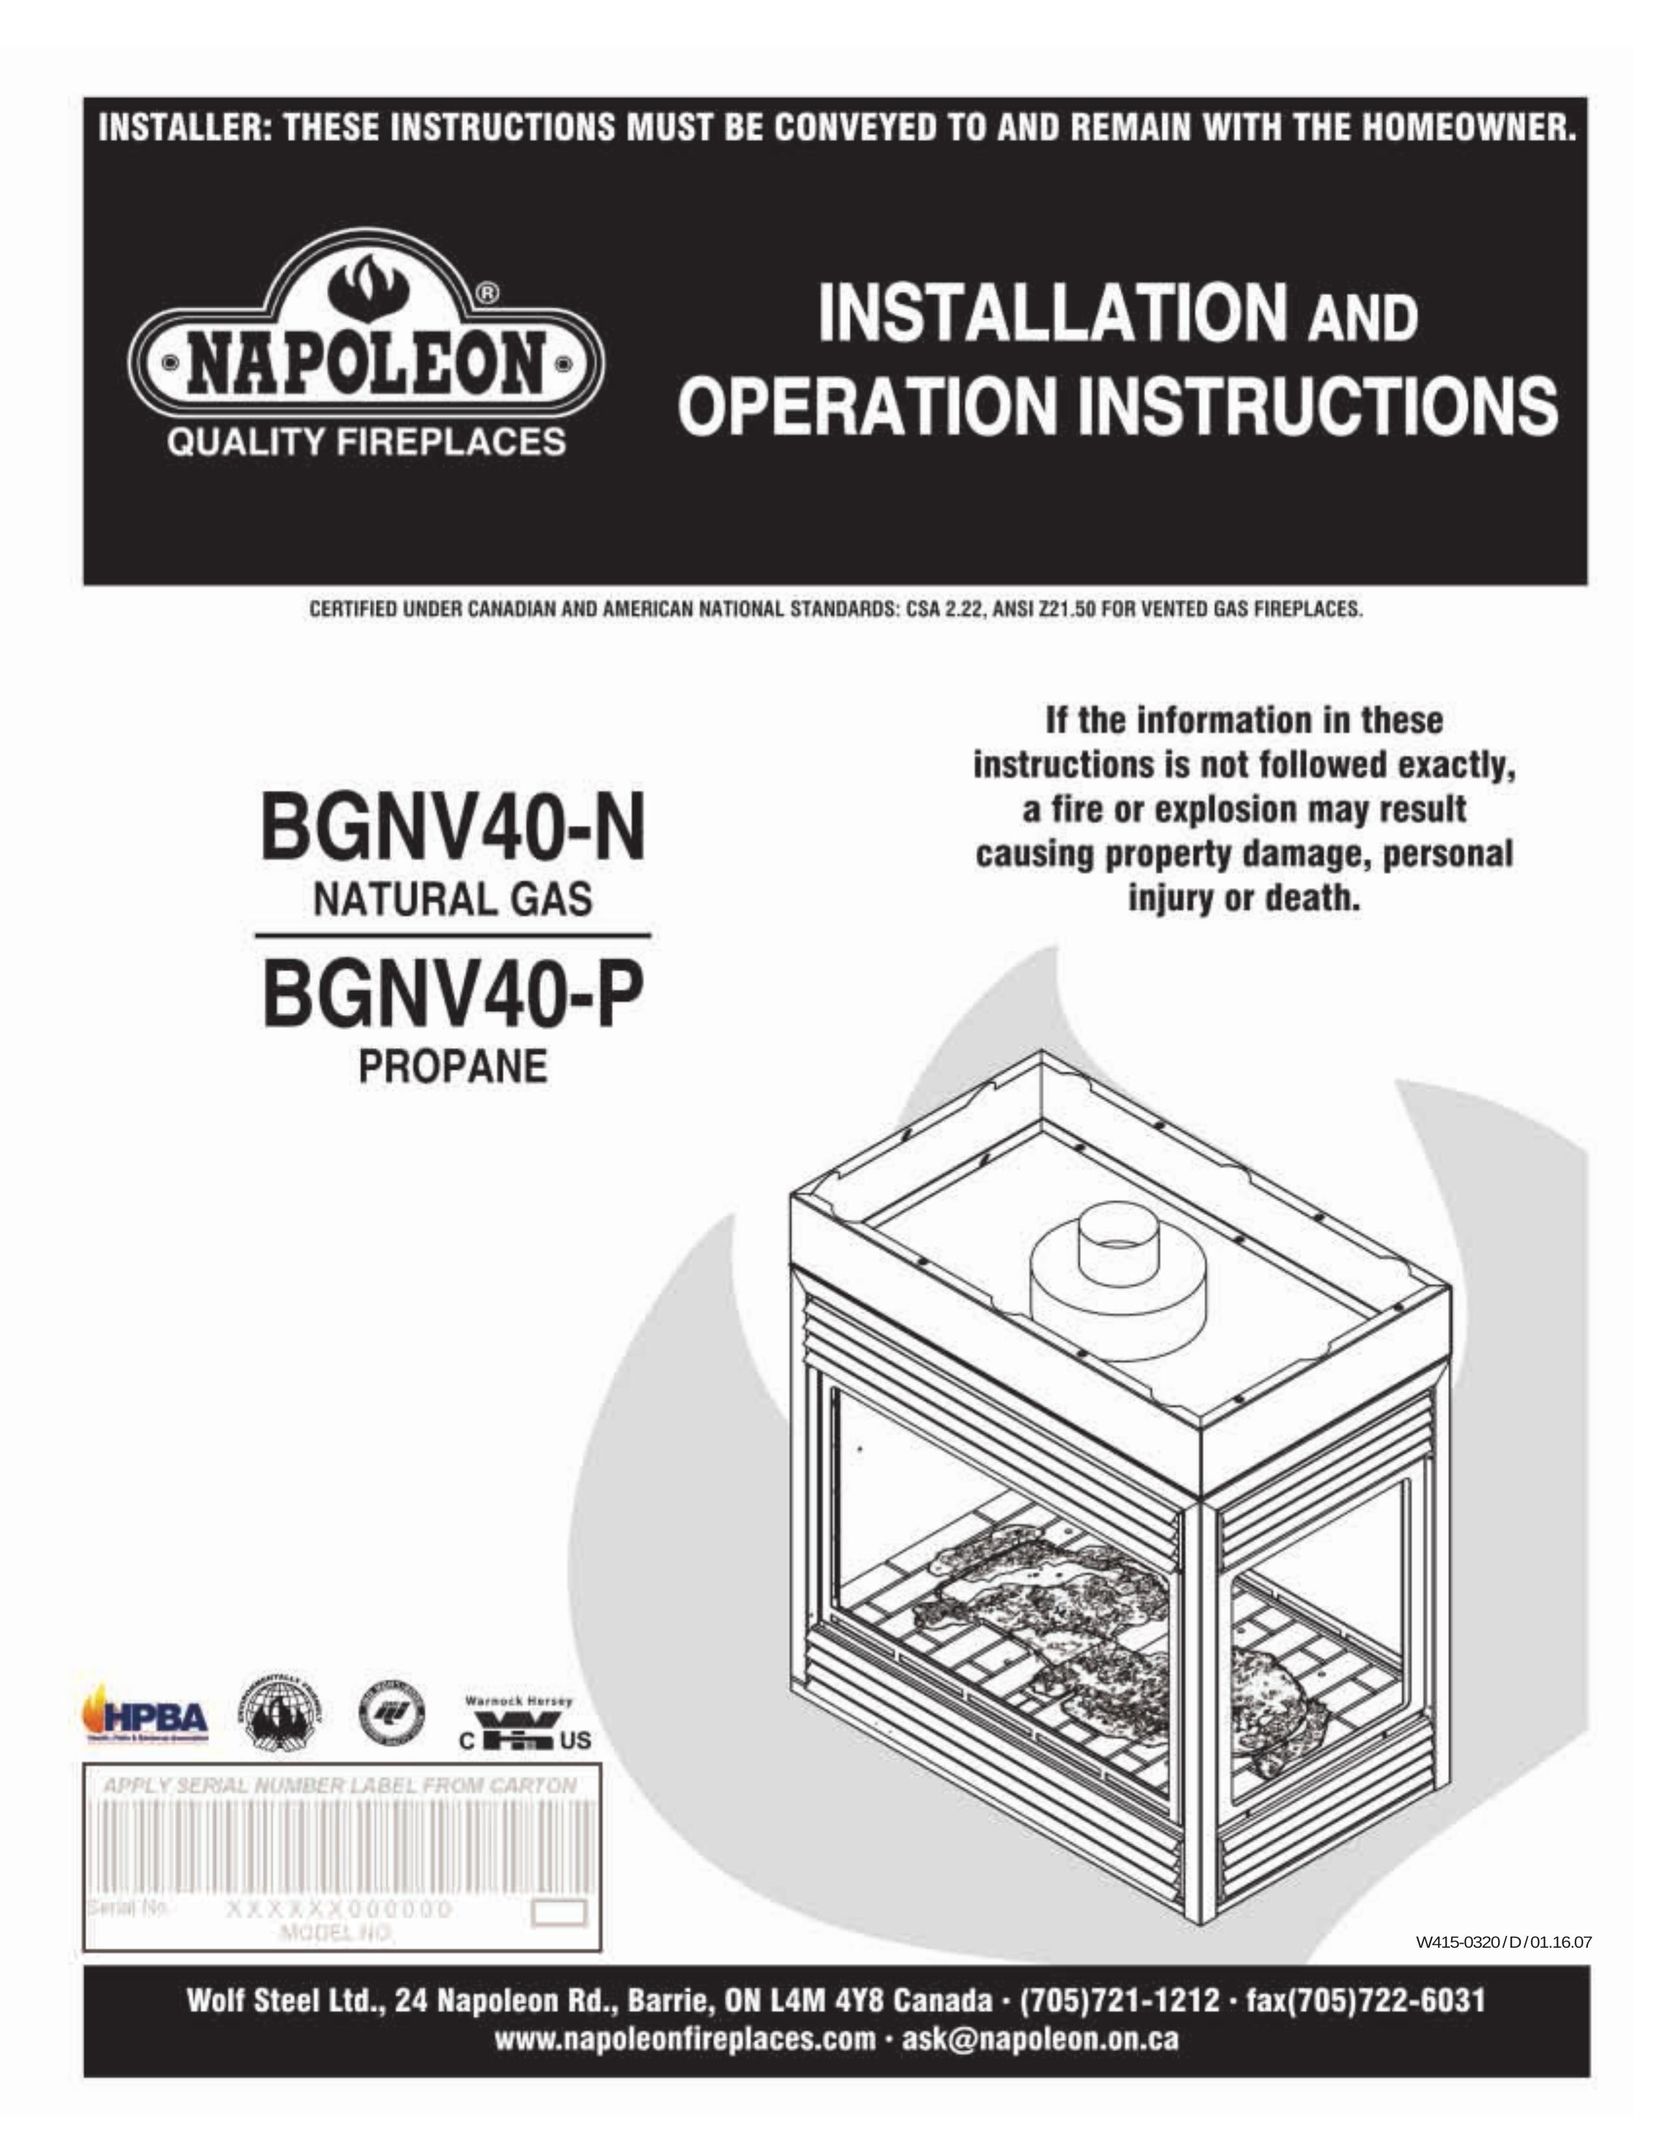 Napoleon Fireplaces BGNV40-N Indoor Fireplace User Manual